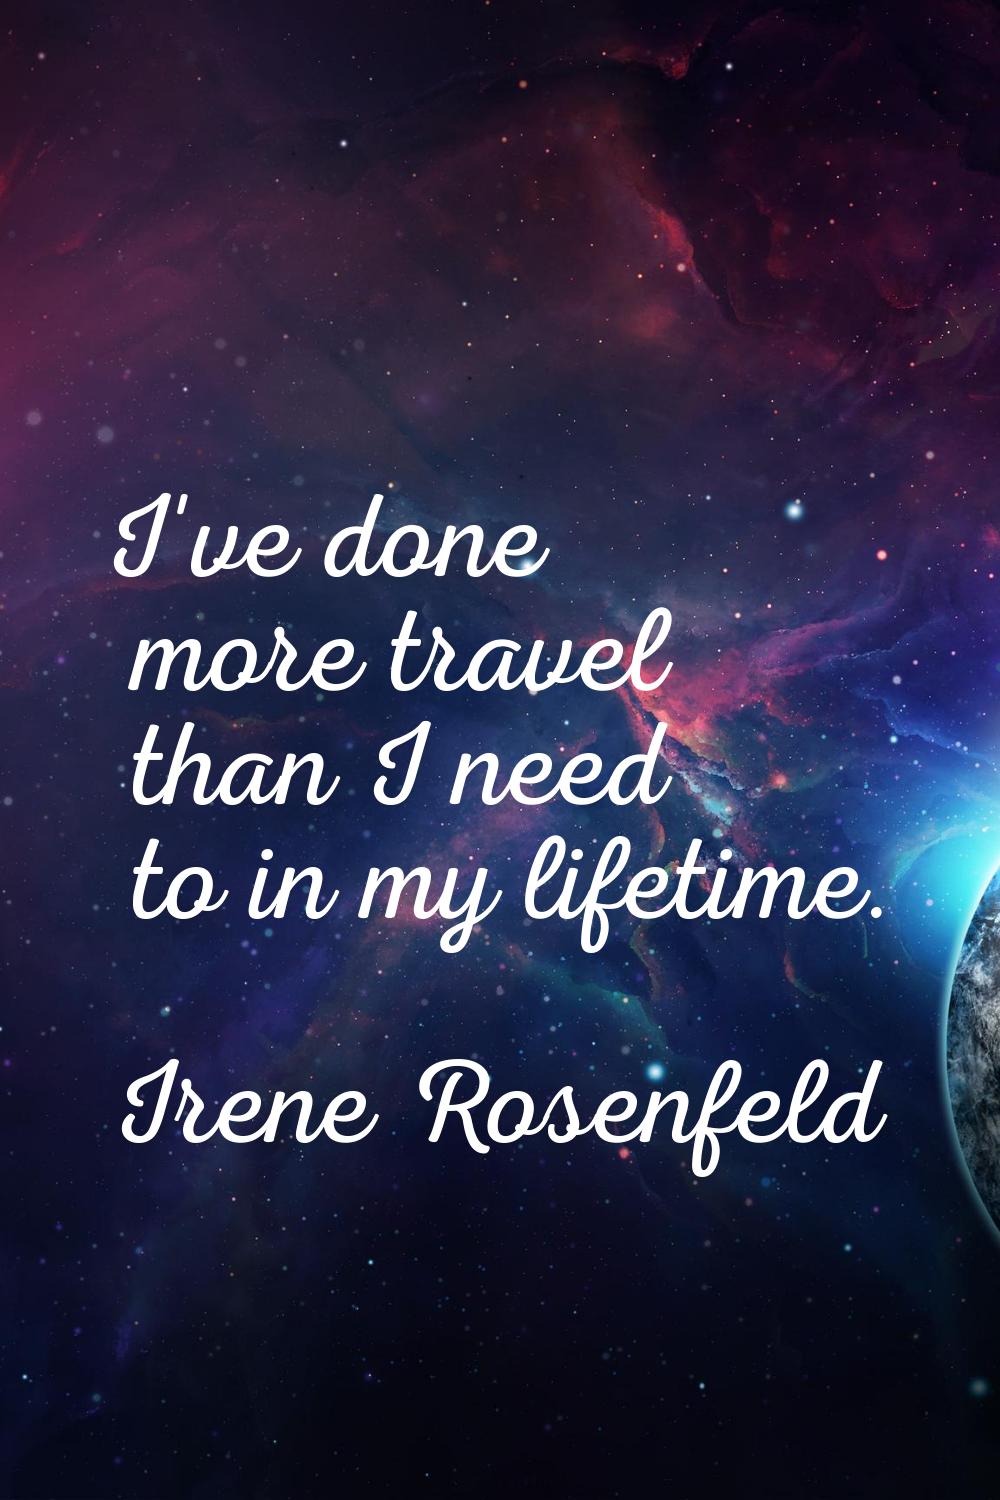 I've done more travel than I need to in my lifetime.